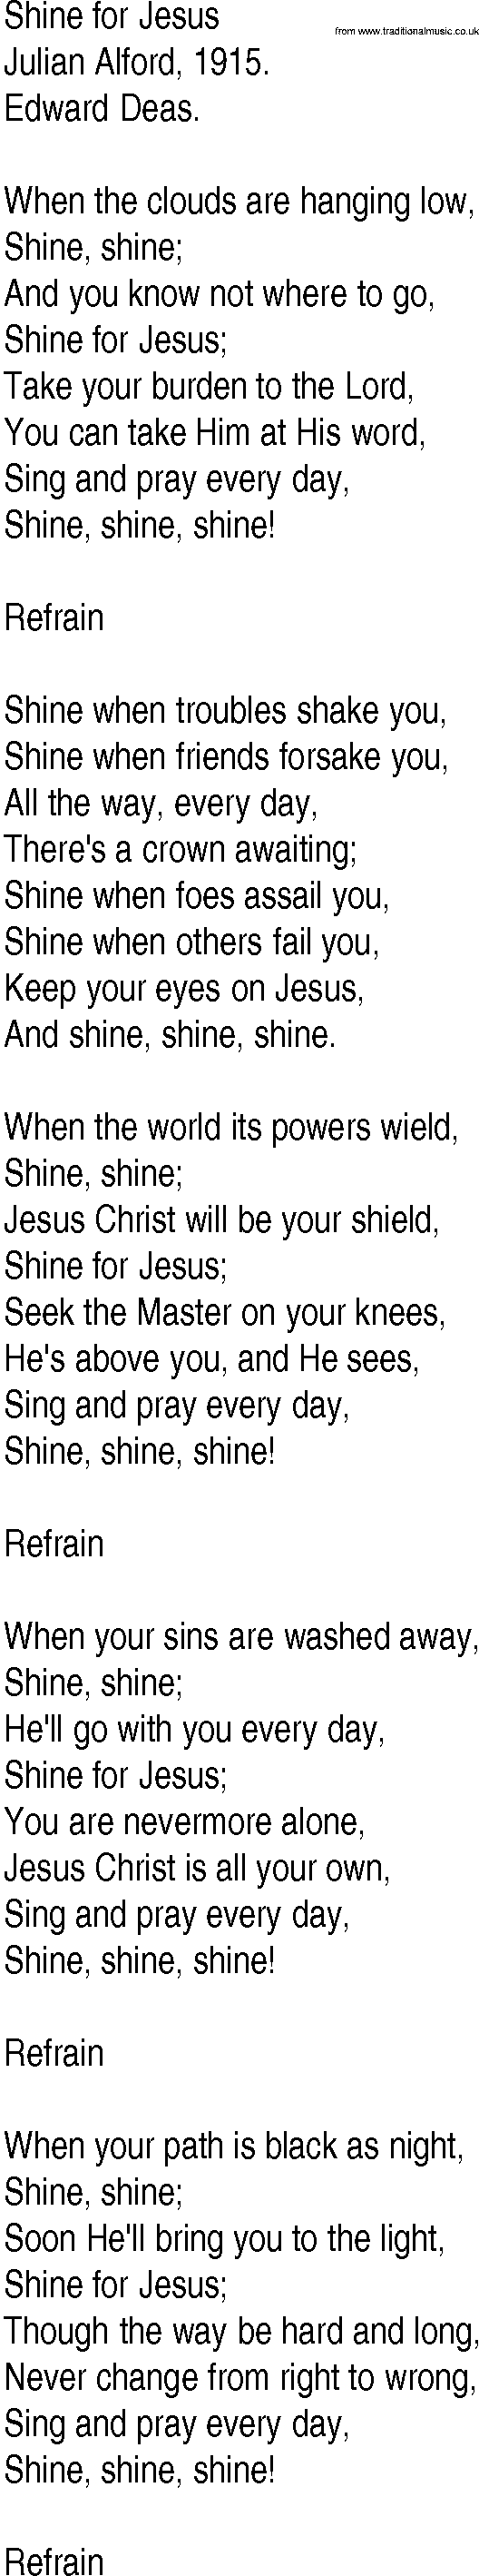 Hymn and Gospel Song: Shine for Jesus by Julian Alford lyrics